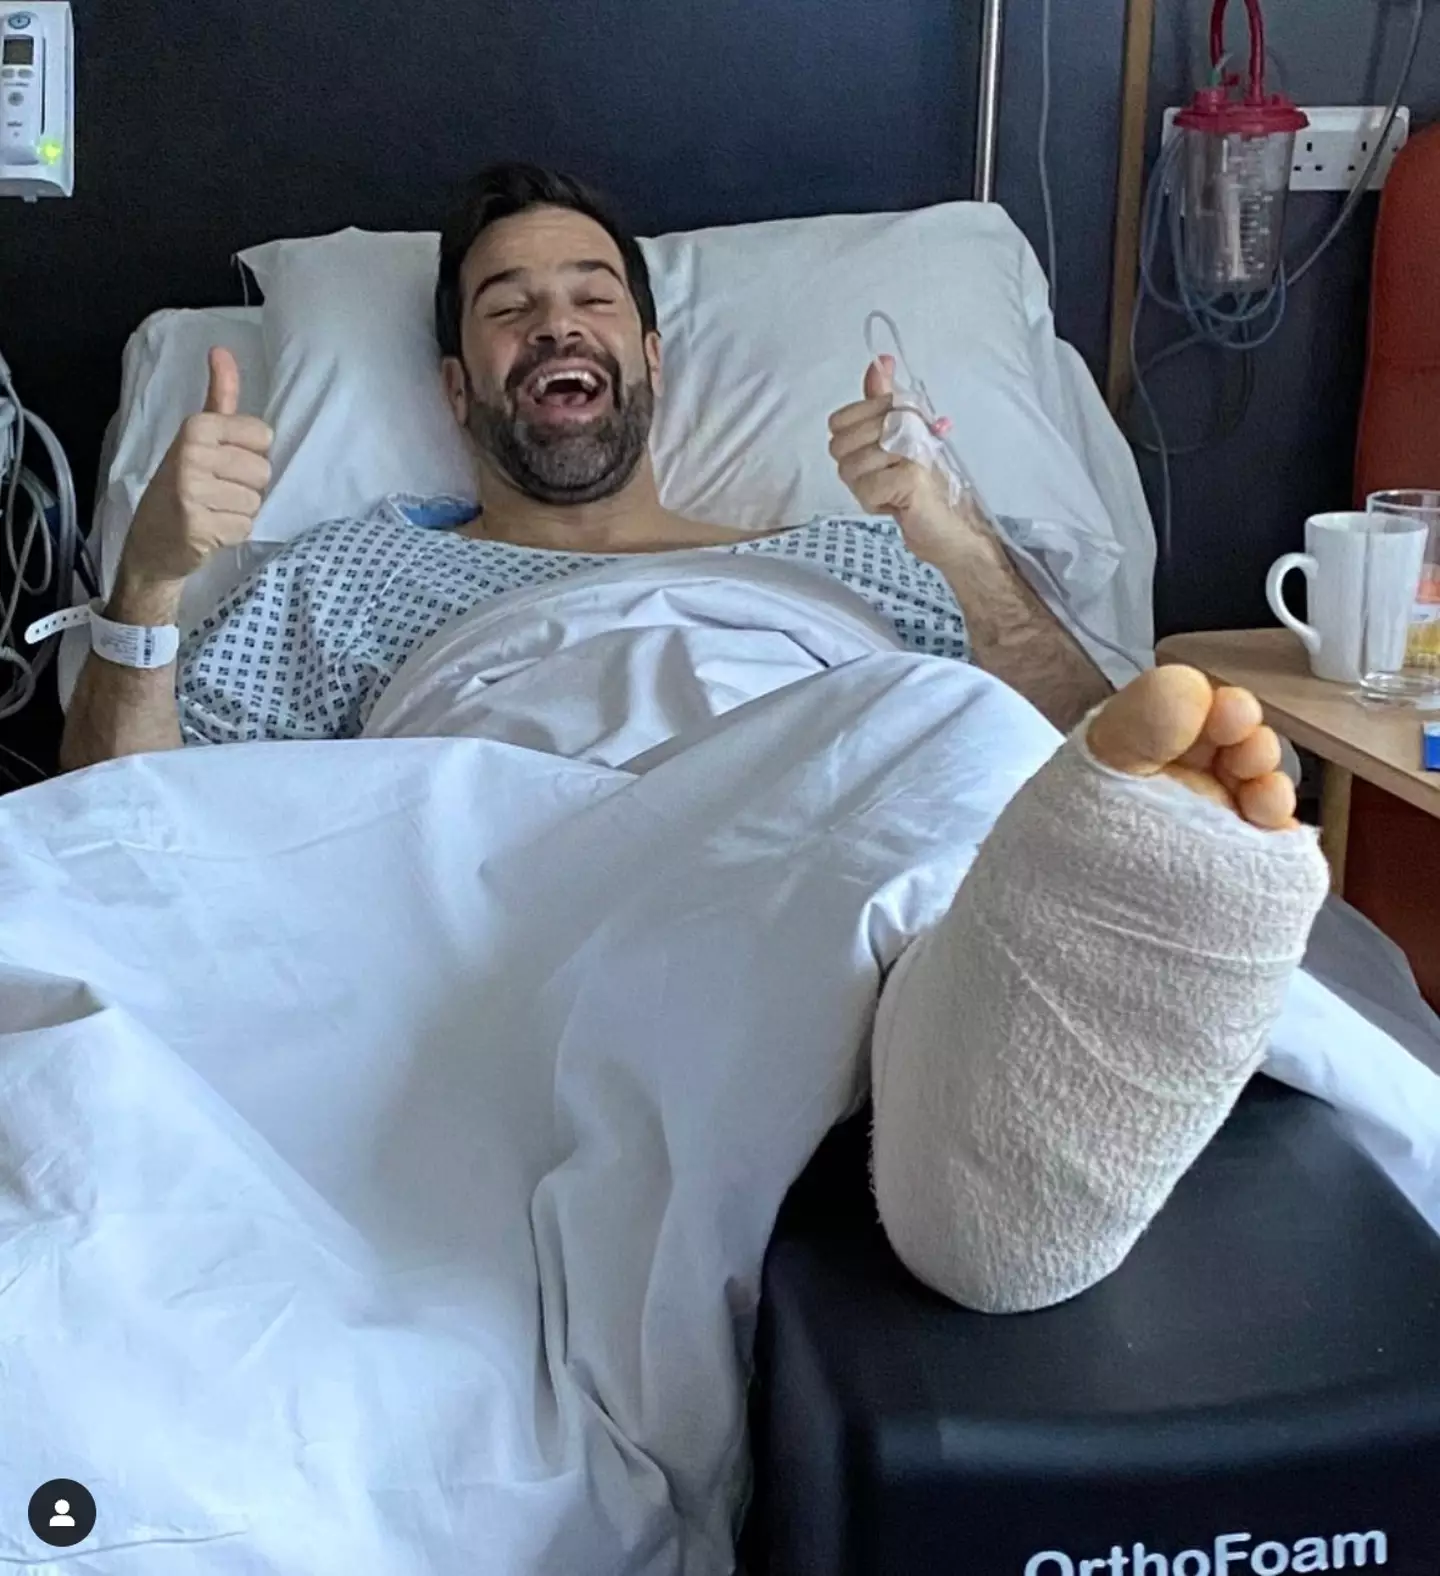 BBC Morning Live fans have been questioning what has happened to Gethin Jones after the presenter came onto the show with crutches and wearing a boot (Instagram Gethin Jones).